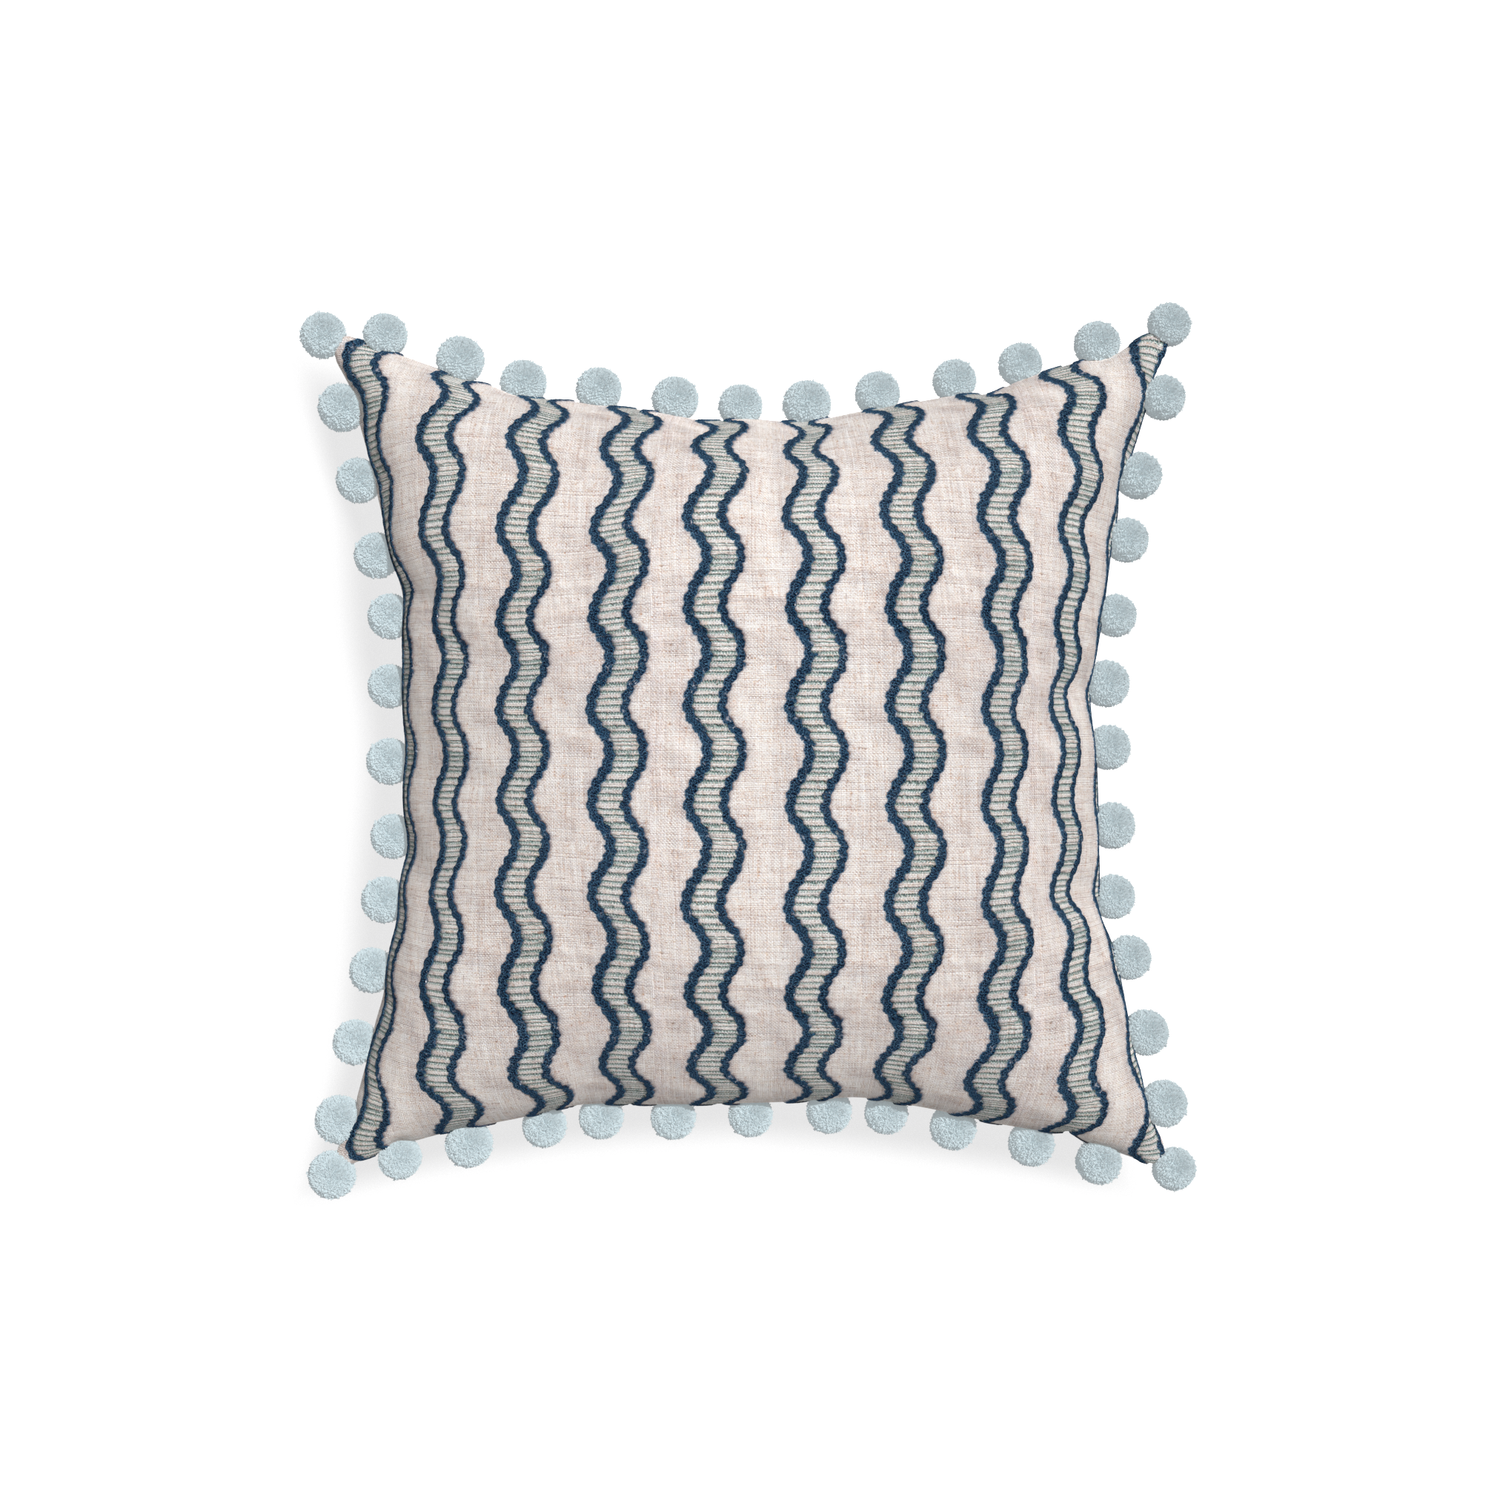 18-square beatrice custom embroidered wavepillow with powder pom pom on white background